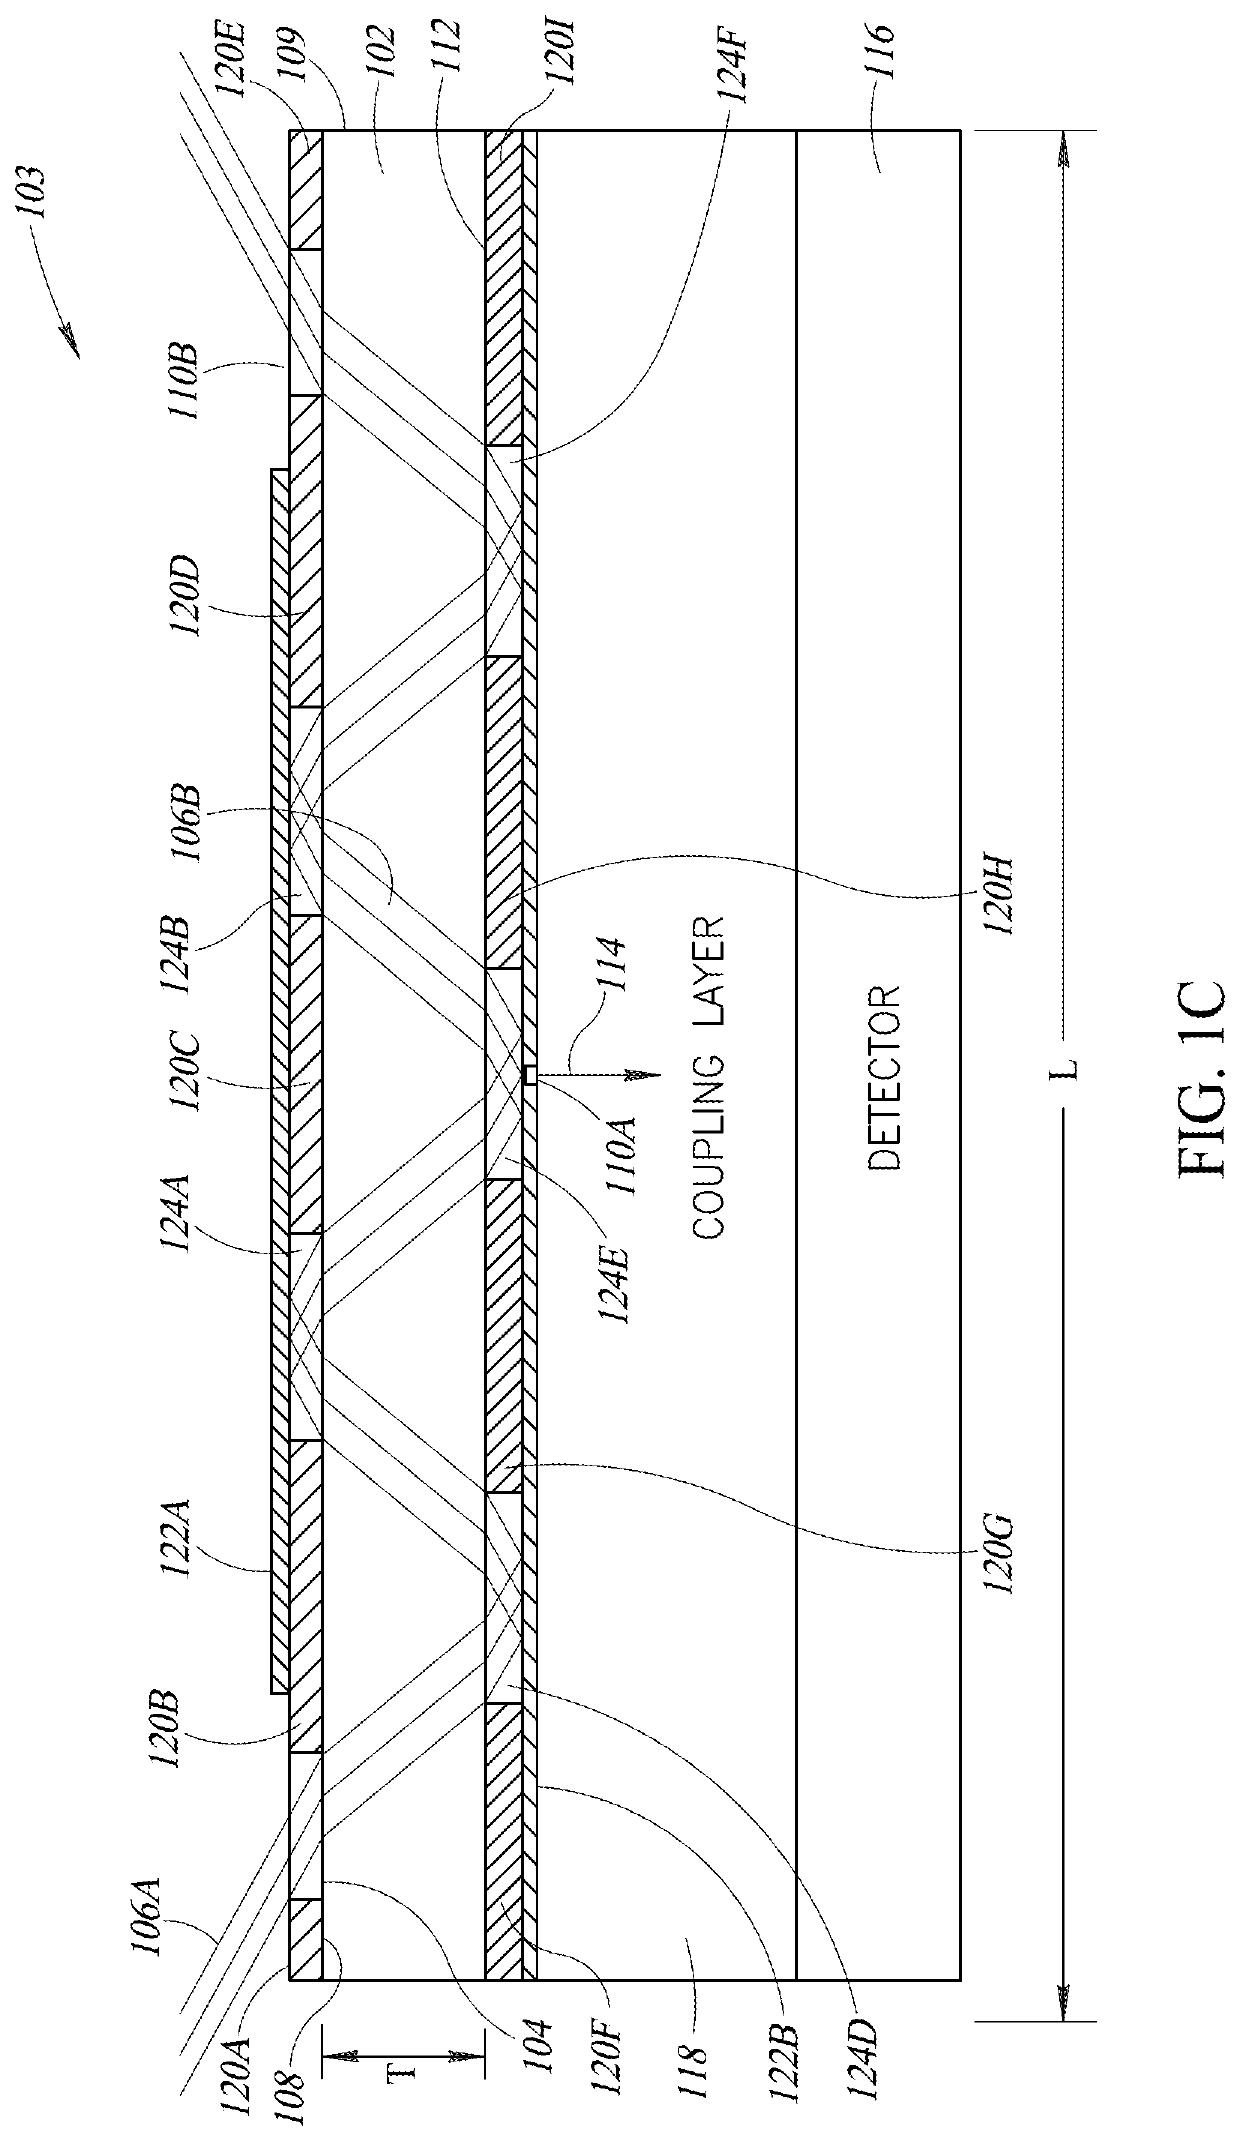 Integration of optical components within a folded optical path